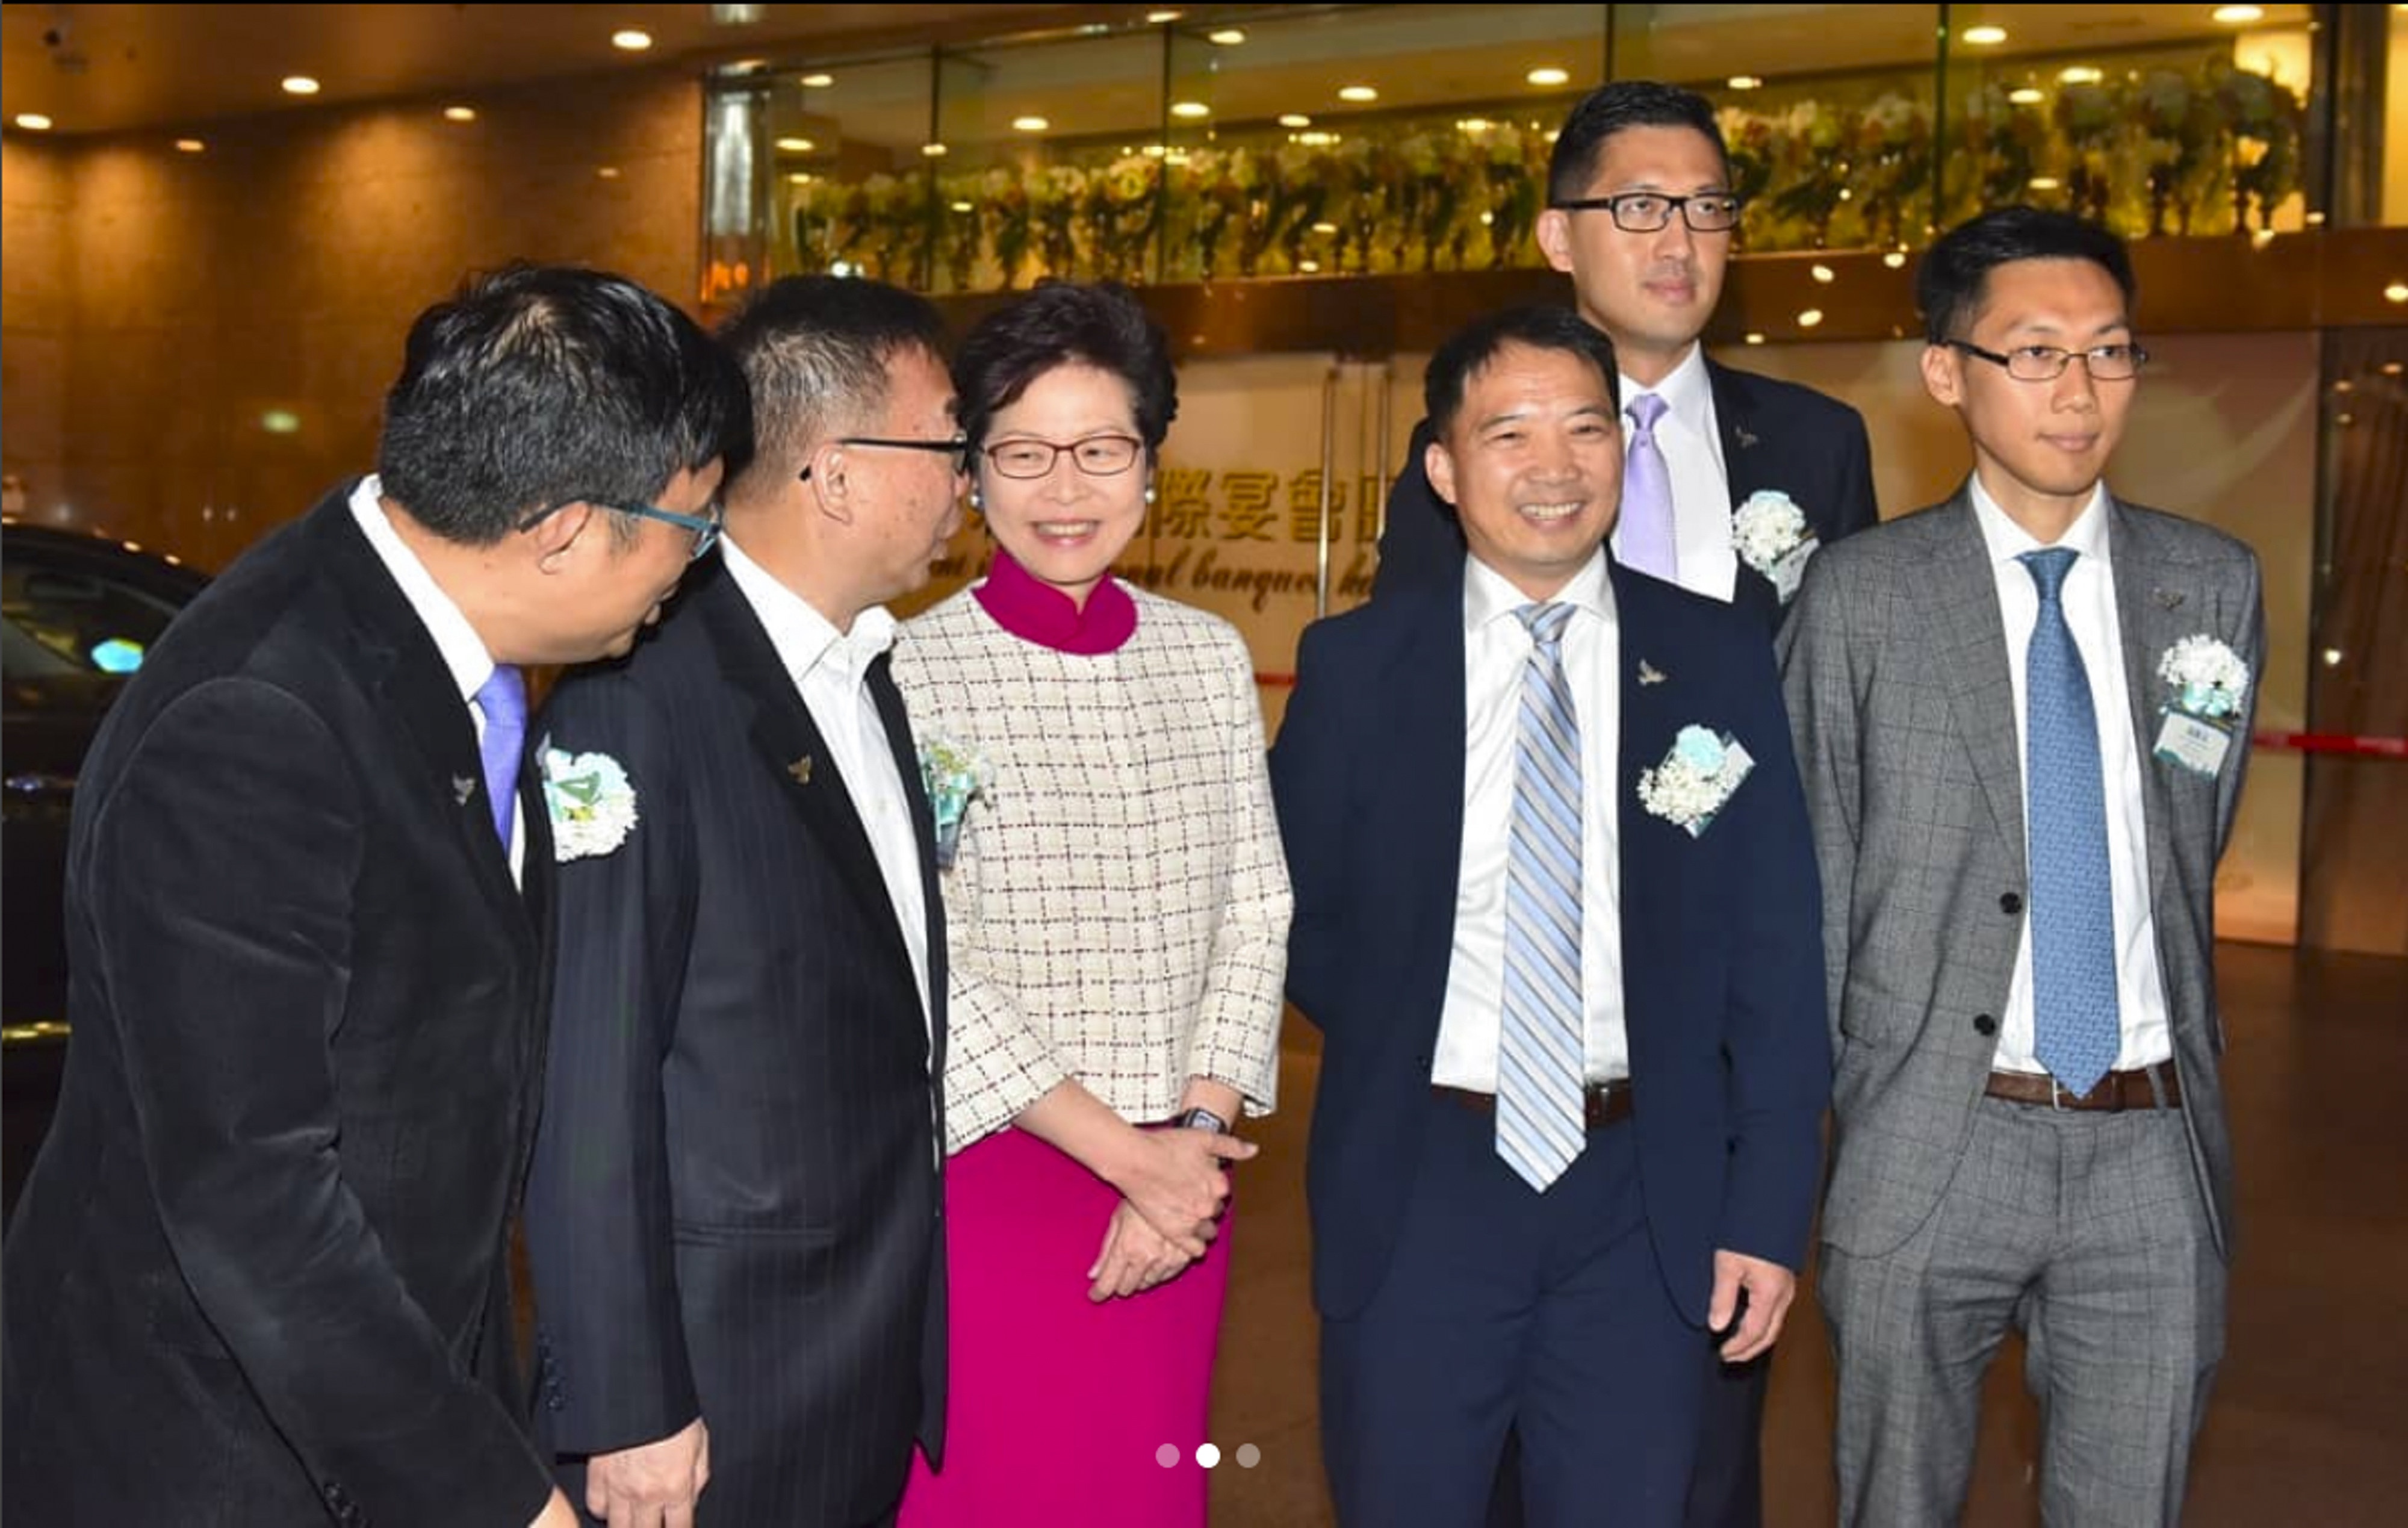 The city’s Democratic Party hosted then leader Carrie Lam (centre) at its 2019 fundraiser event. Photo: Instagram